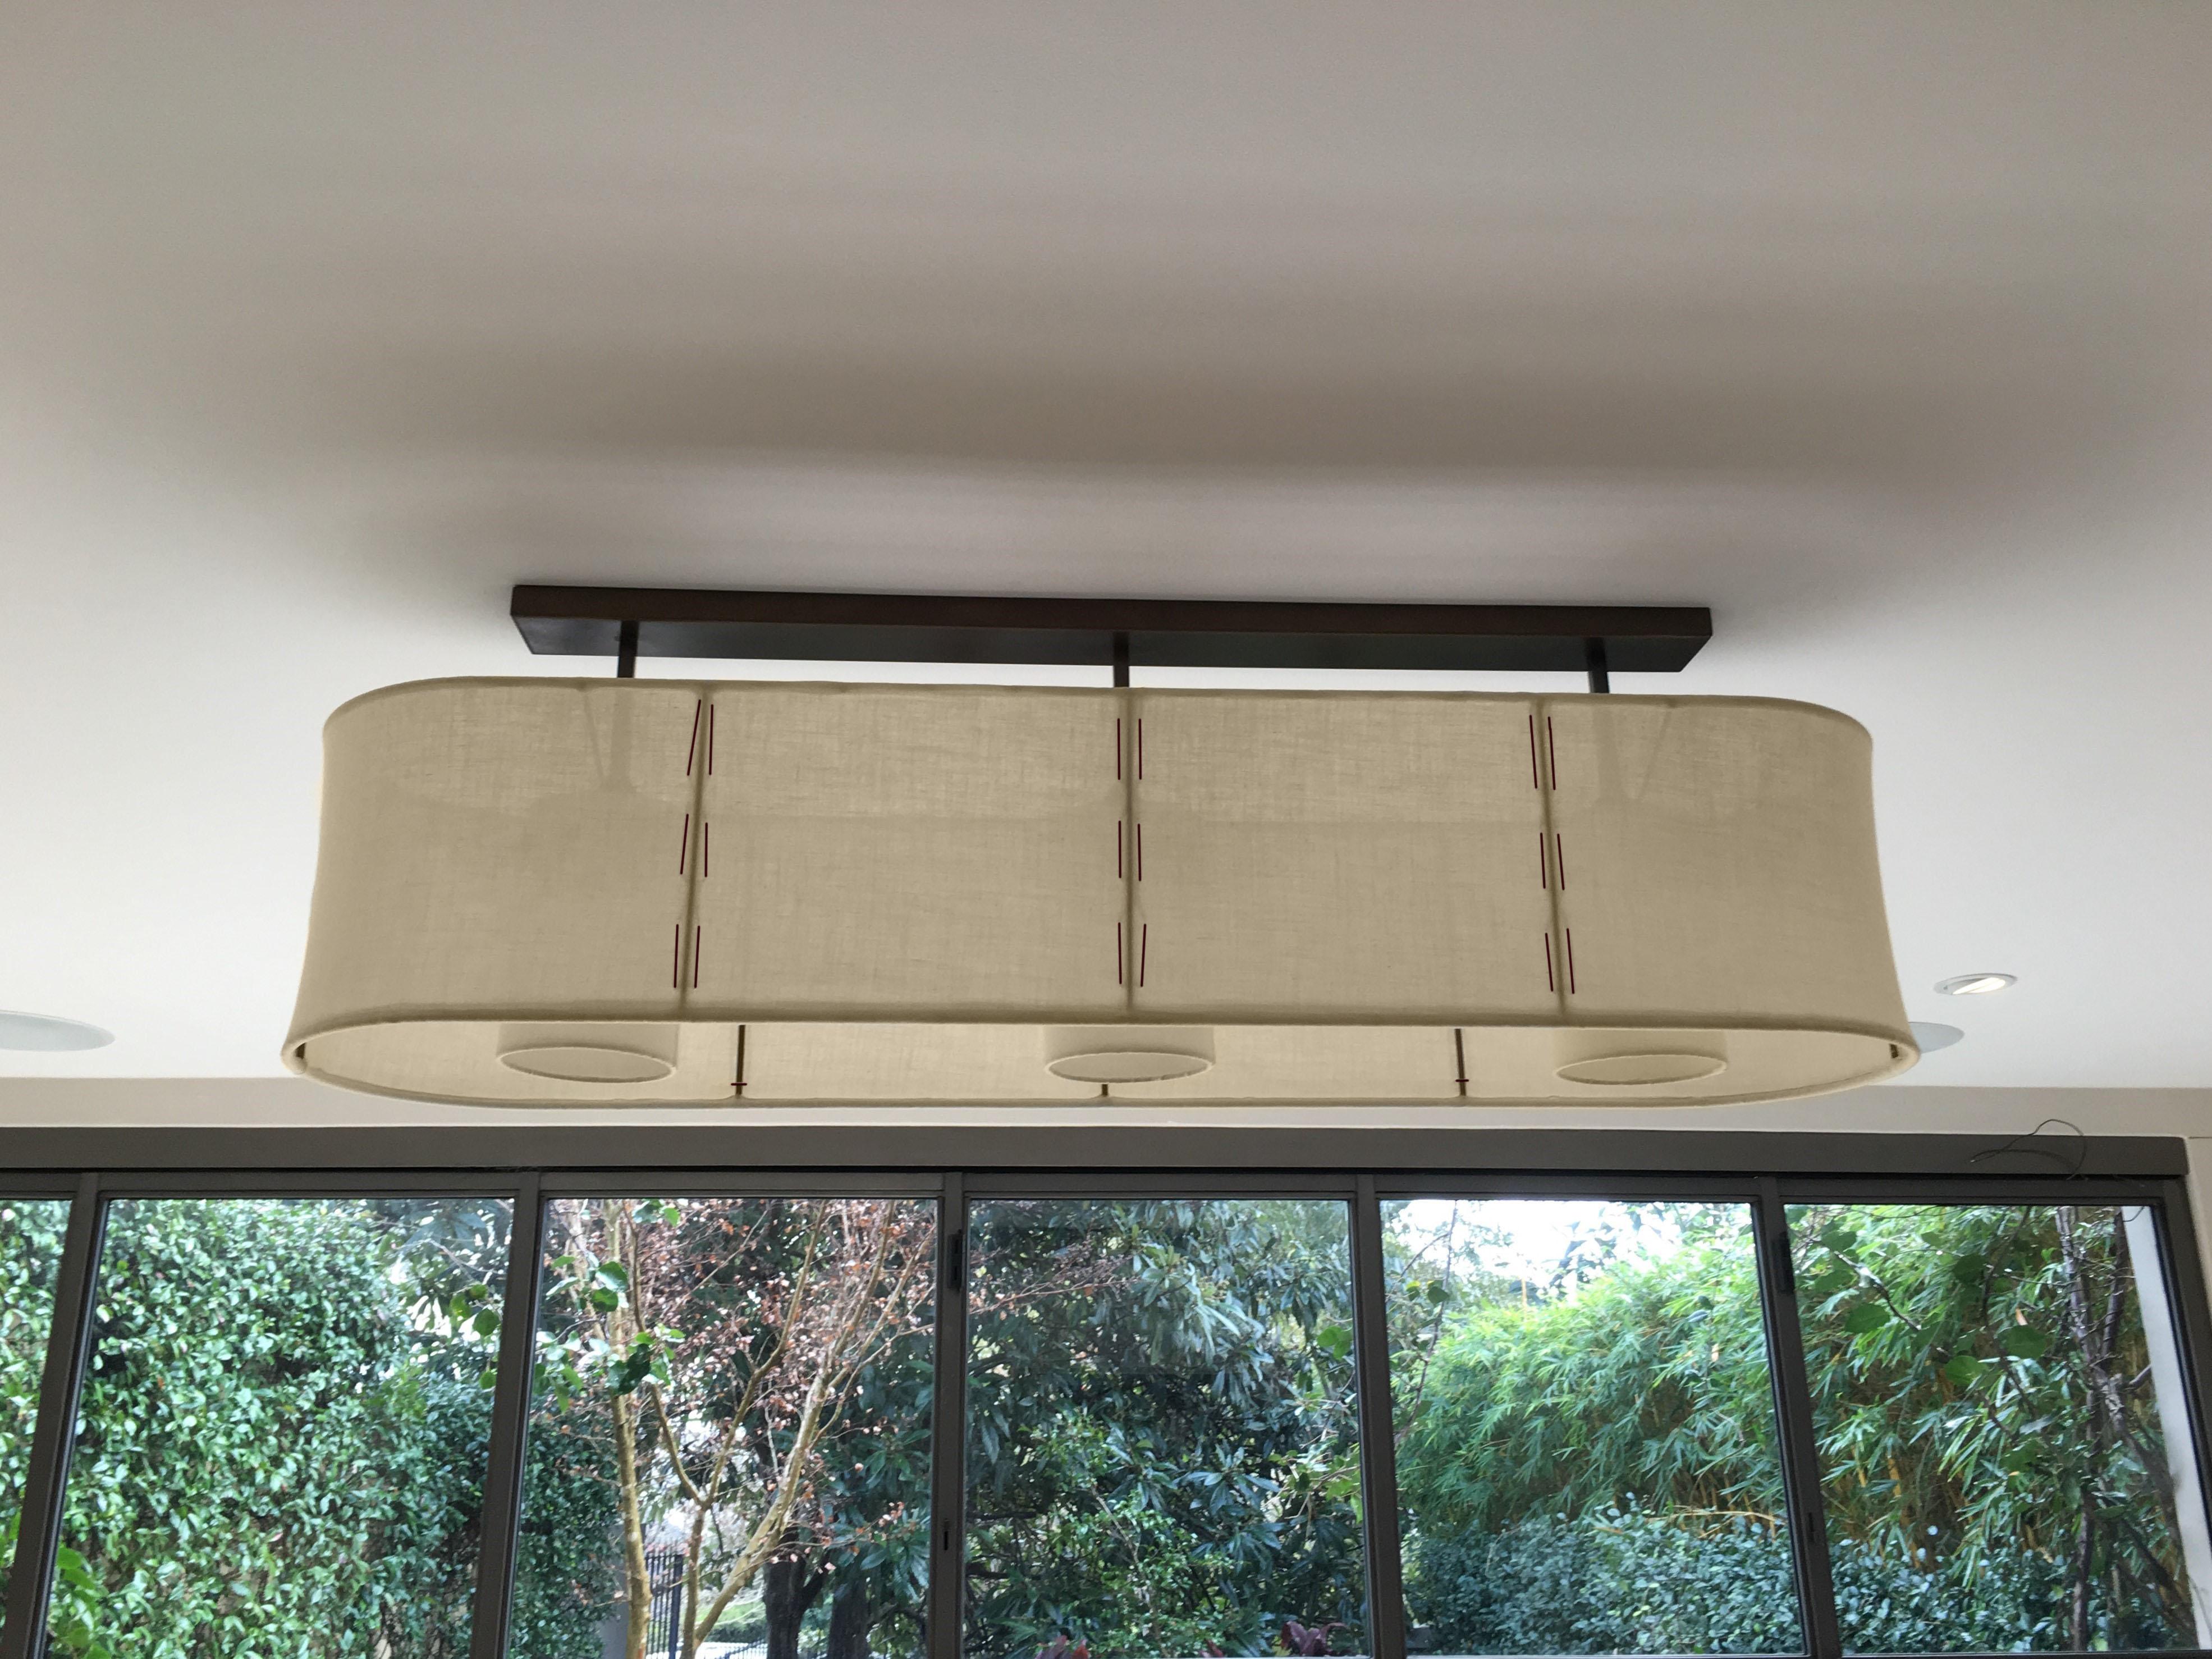 Horizon Pendant is a minimal, elegant, versatile, flush mount or suspended 3 light pendant. This subtle minimal statement light is designed and handcrafted one piece at a time in Australia of fine translucent Italian linen and patinated brass.